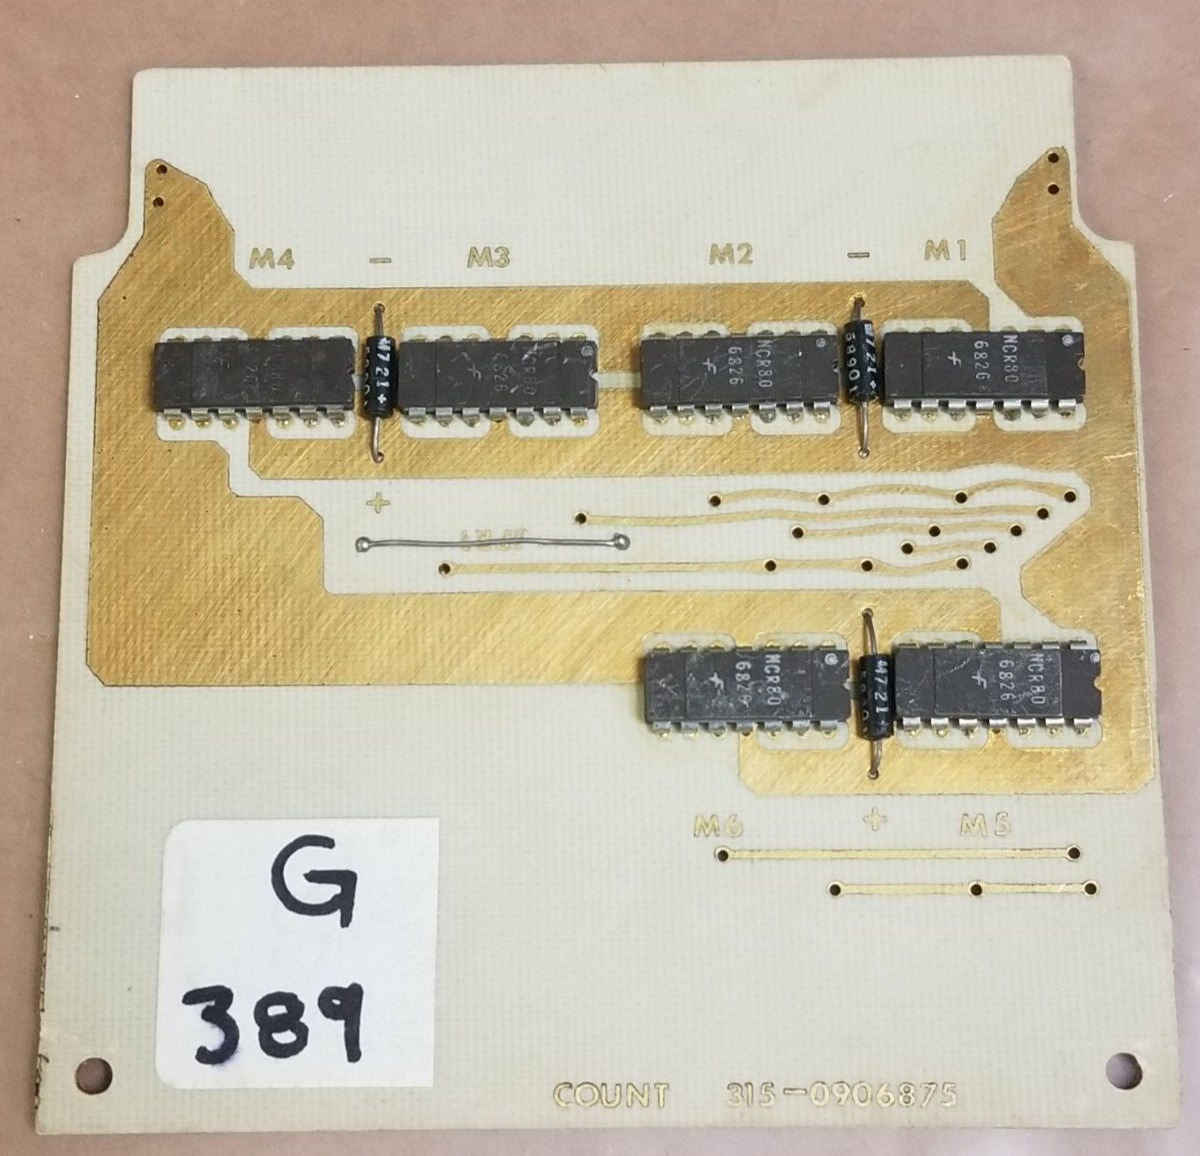 VERY RARE 1968 NCR Century 100 Count Card GOLD PLATED PCB 315-0906875 #G389